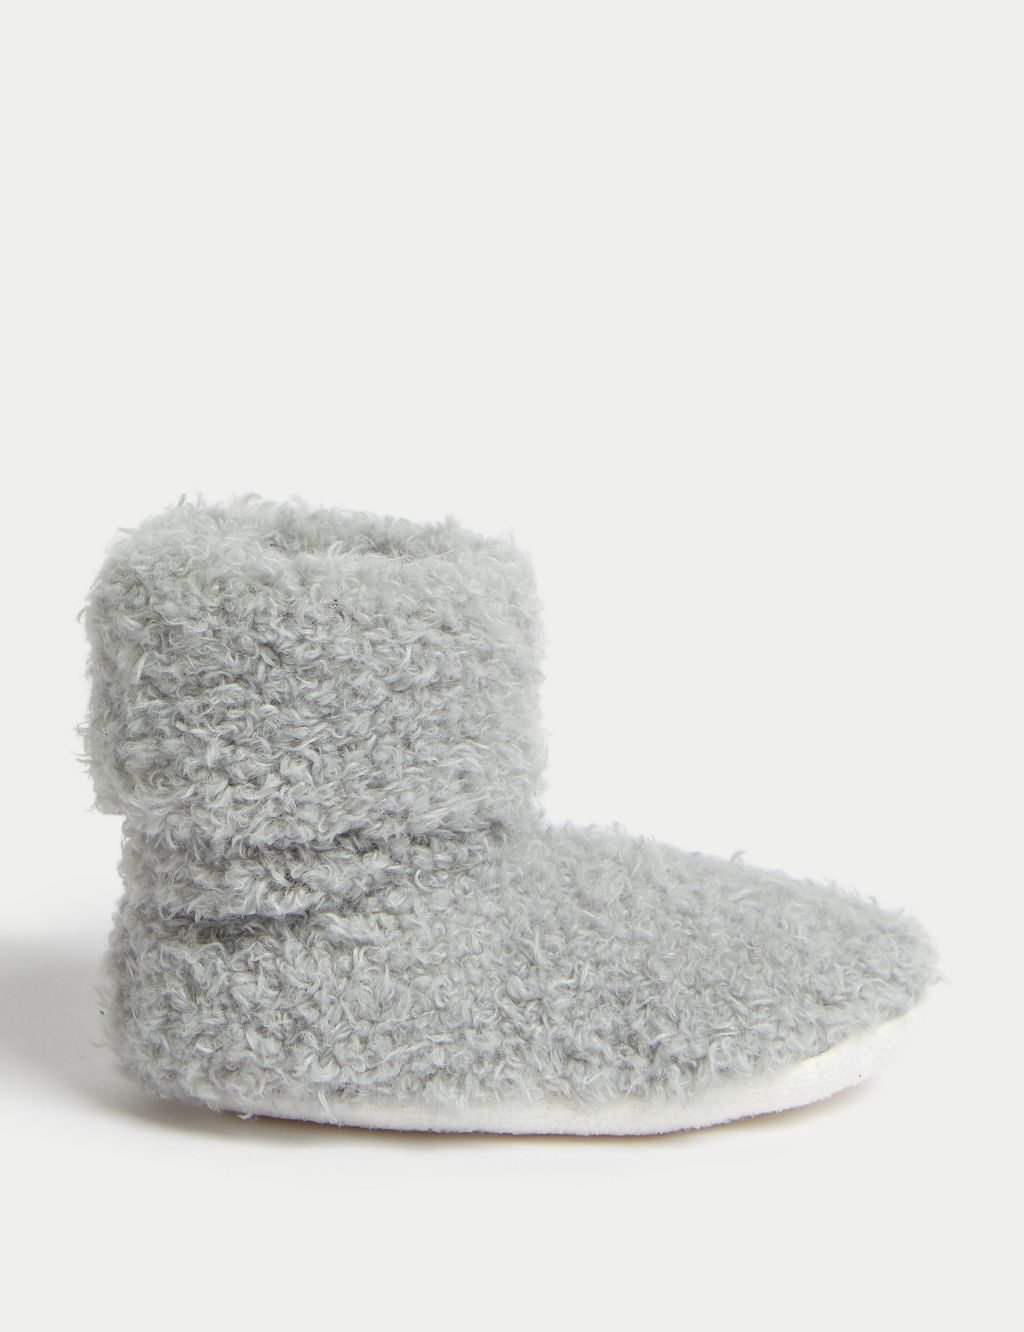 Cosy Booties image 1